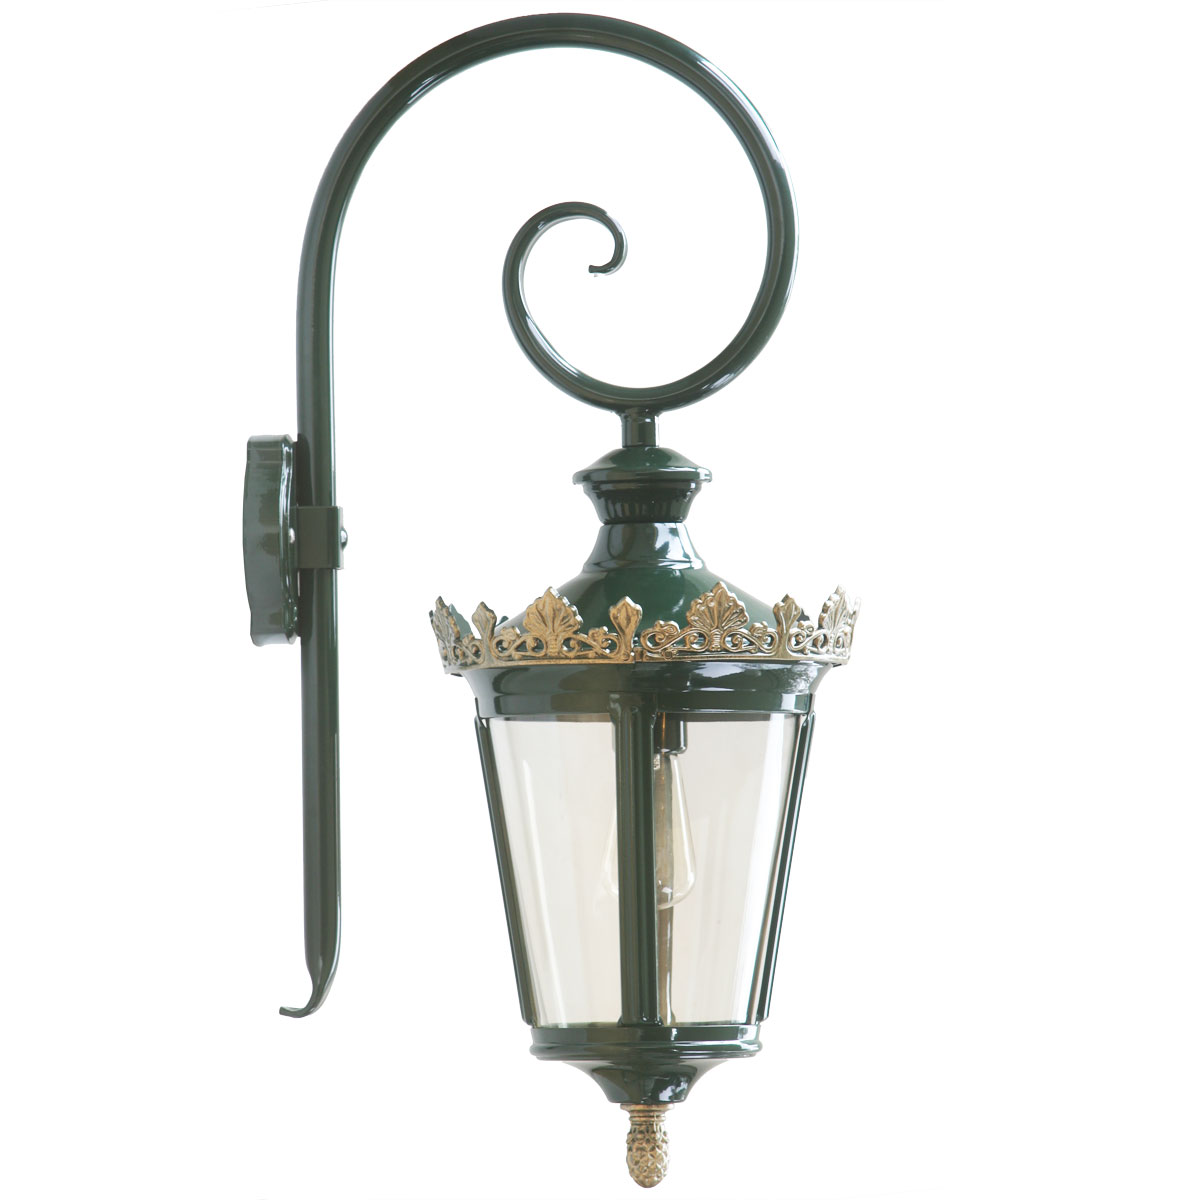 Excellent Empire Lantern Louvre with Crozier